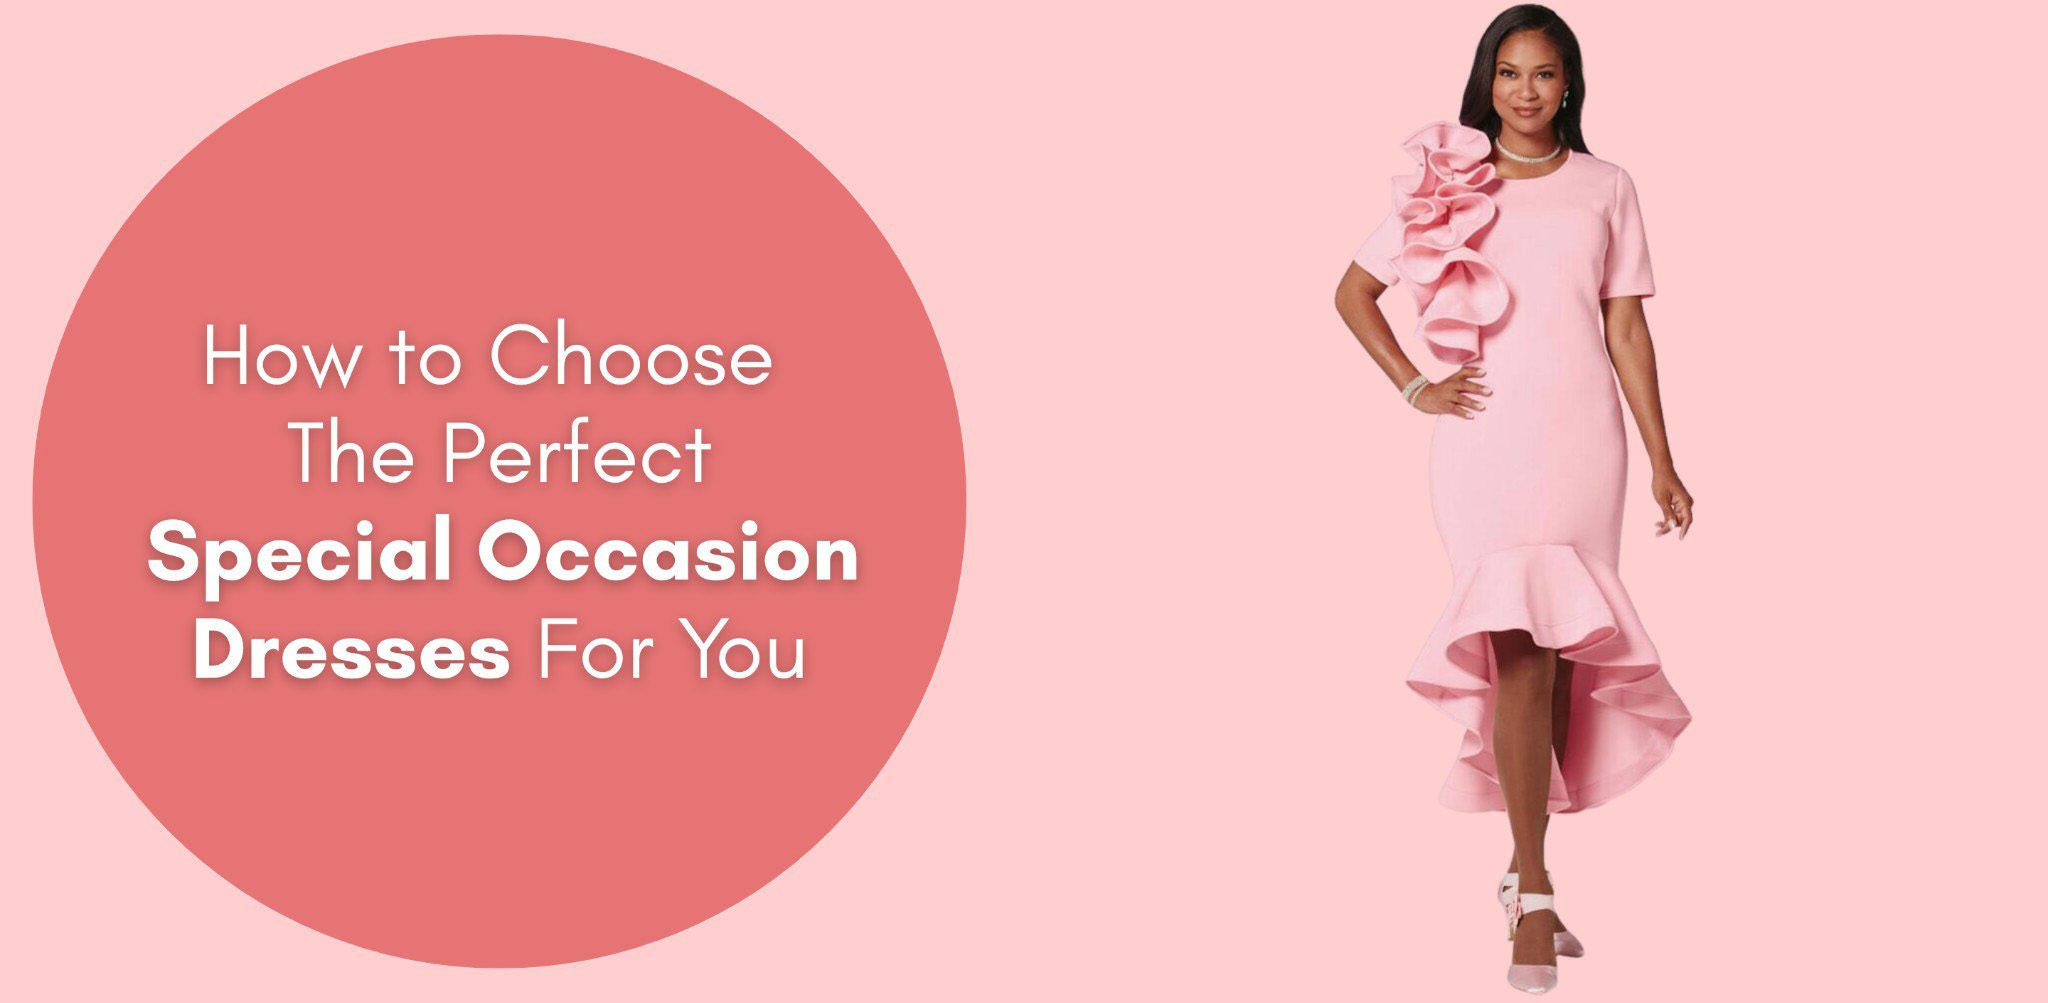 How to Choose The Perfect Special Occasion Dresses For You